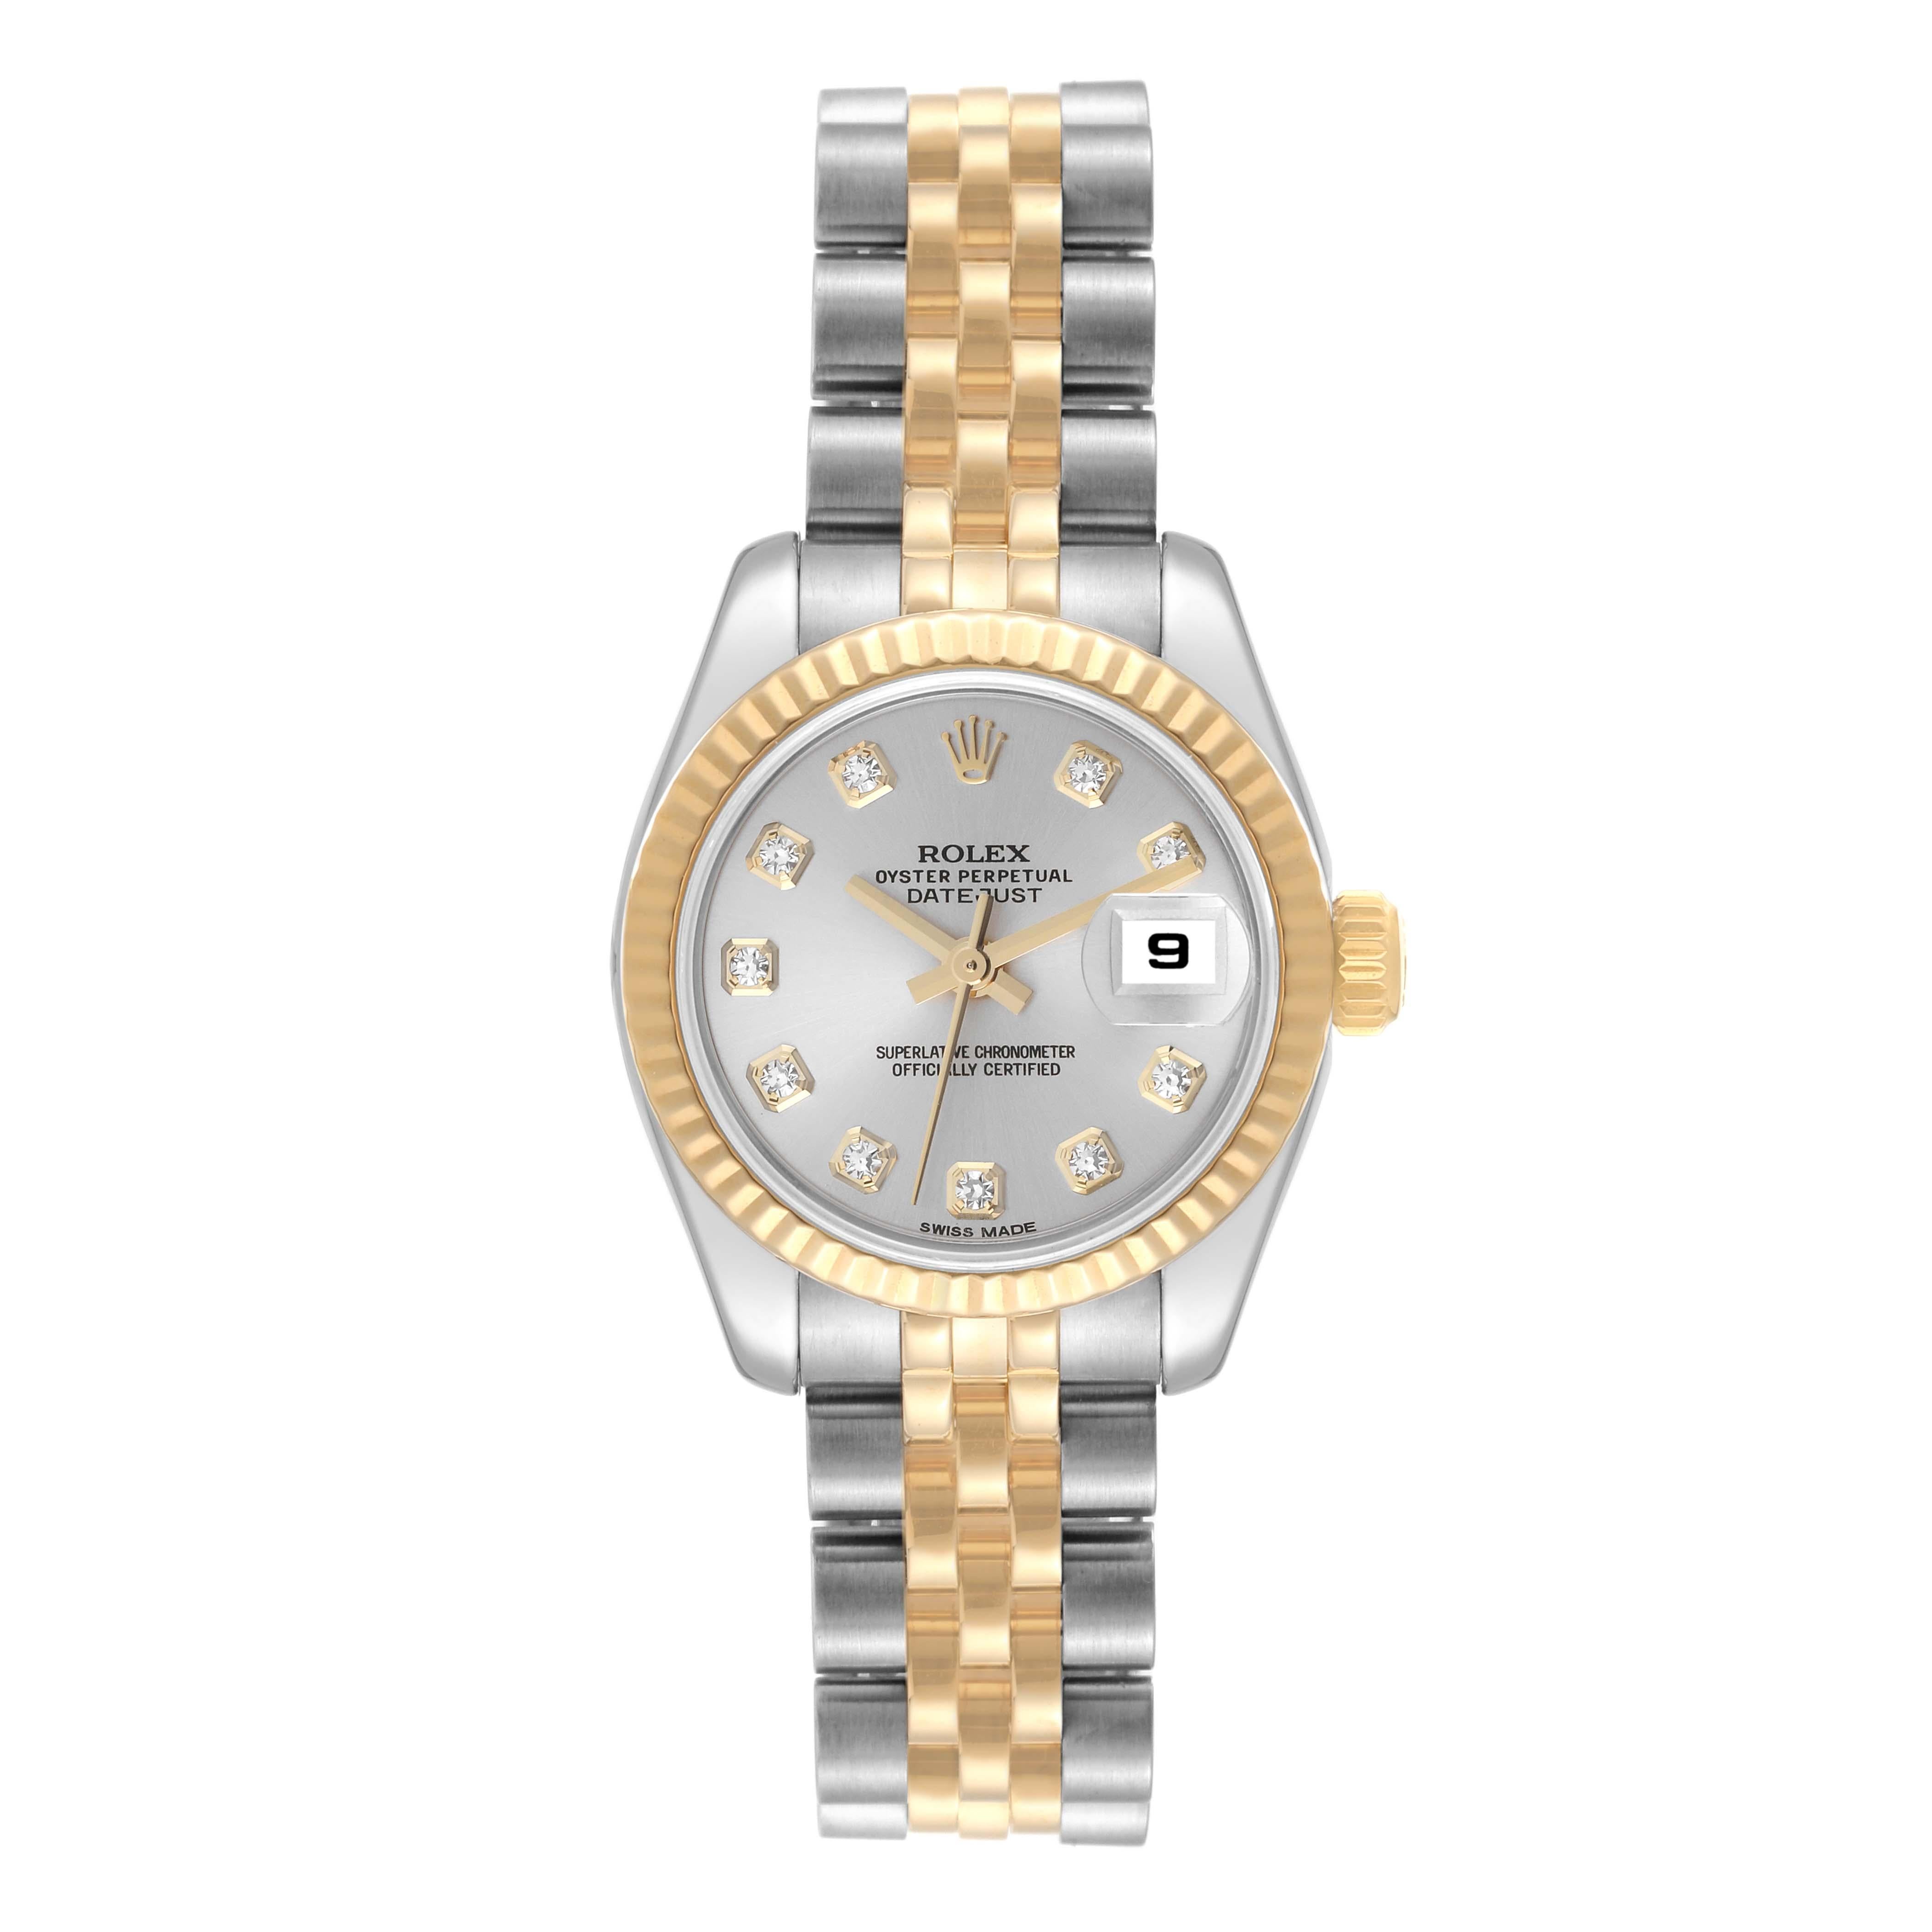 Rolex Datejust 26 Steel Yellow Gold Diamond Ladies Watch 179173. Officially certified chronometer self-winding movement. Stainless steel oyster case 26 mm in diameter. Rolex logo on a 18K yellow gold crown. 18k yellow gold fluted bezel. Scratch